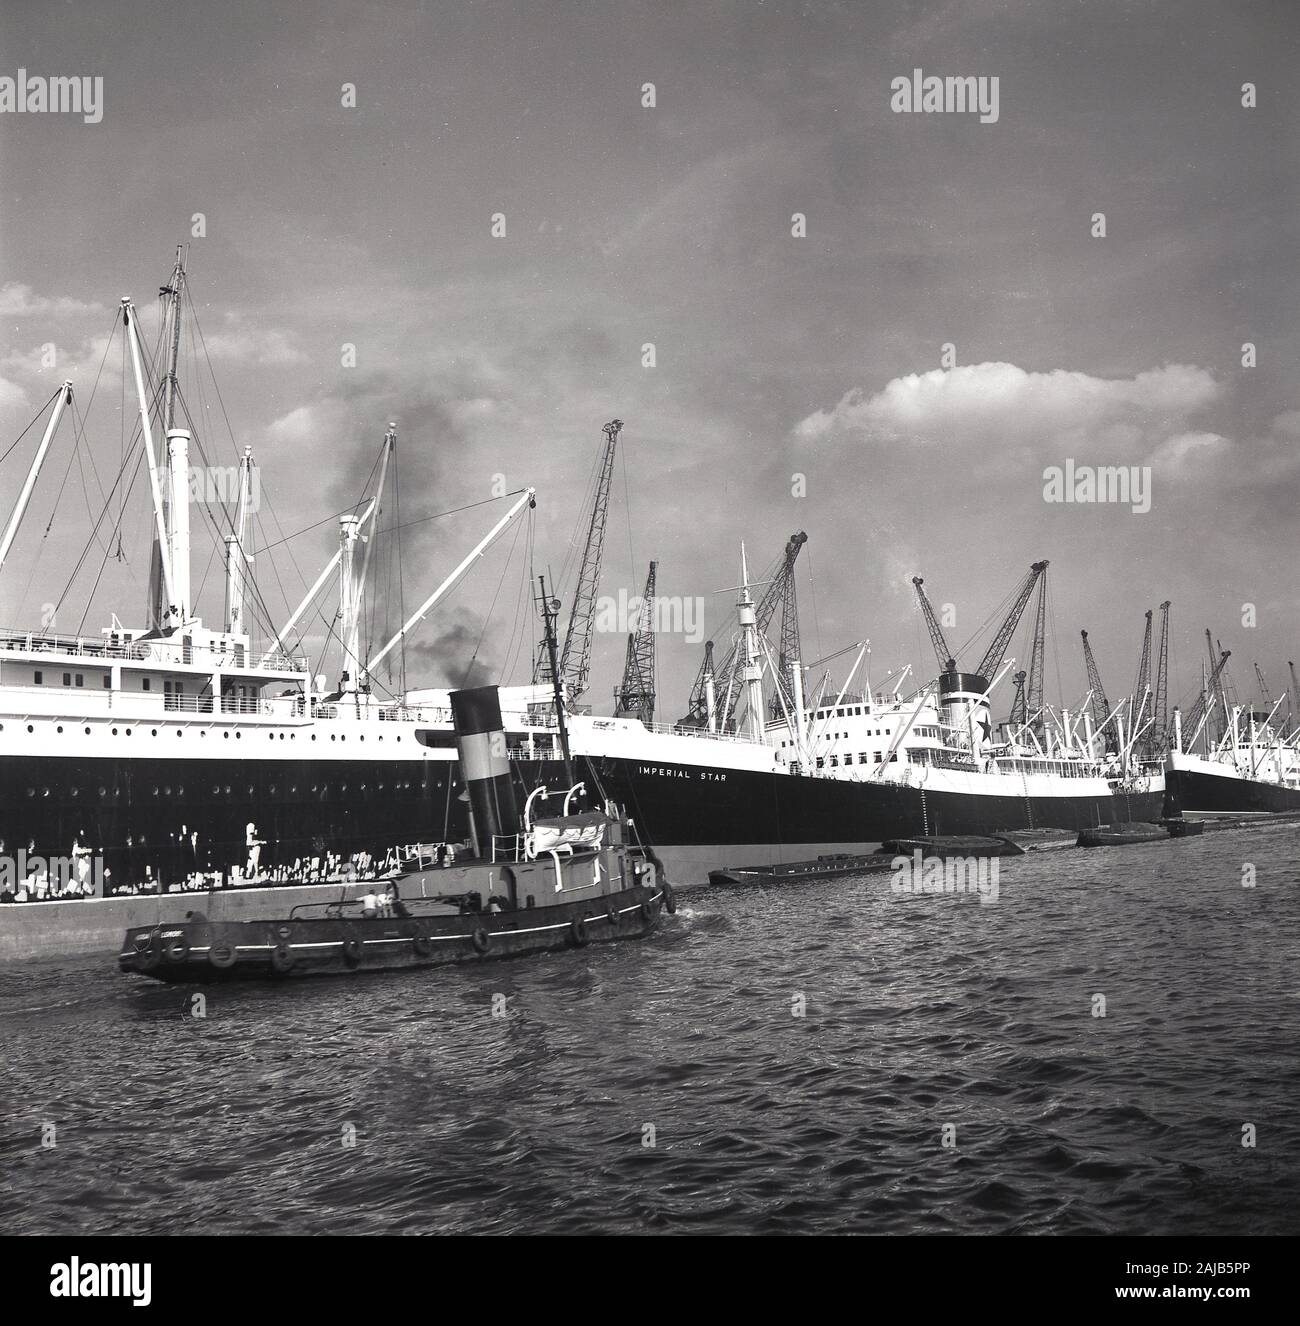 1960s, historical, three steamships moored up beside each other at a working London Docks, including the 'Imperial Star', a ship of the Blue Star line equipped with refrigerated machinery for the carriage of meat. The ship built in Belfast by Harland and Wolff, had 29 cargo spaces insulated by granulated cork. Blus Star line was founded by the Vestey Brothers, a Liverpool-based butchers company, who pioneered shipping refrigeration.  A steam drivern tugboat can also be seen going up the river. Stock Photo